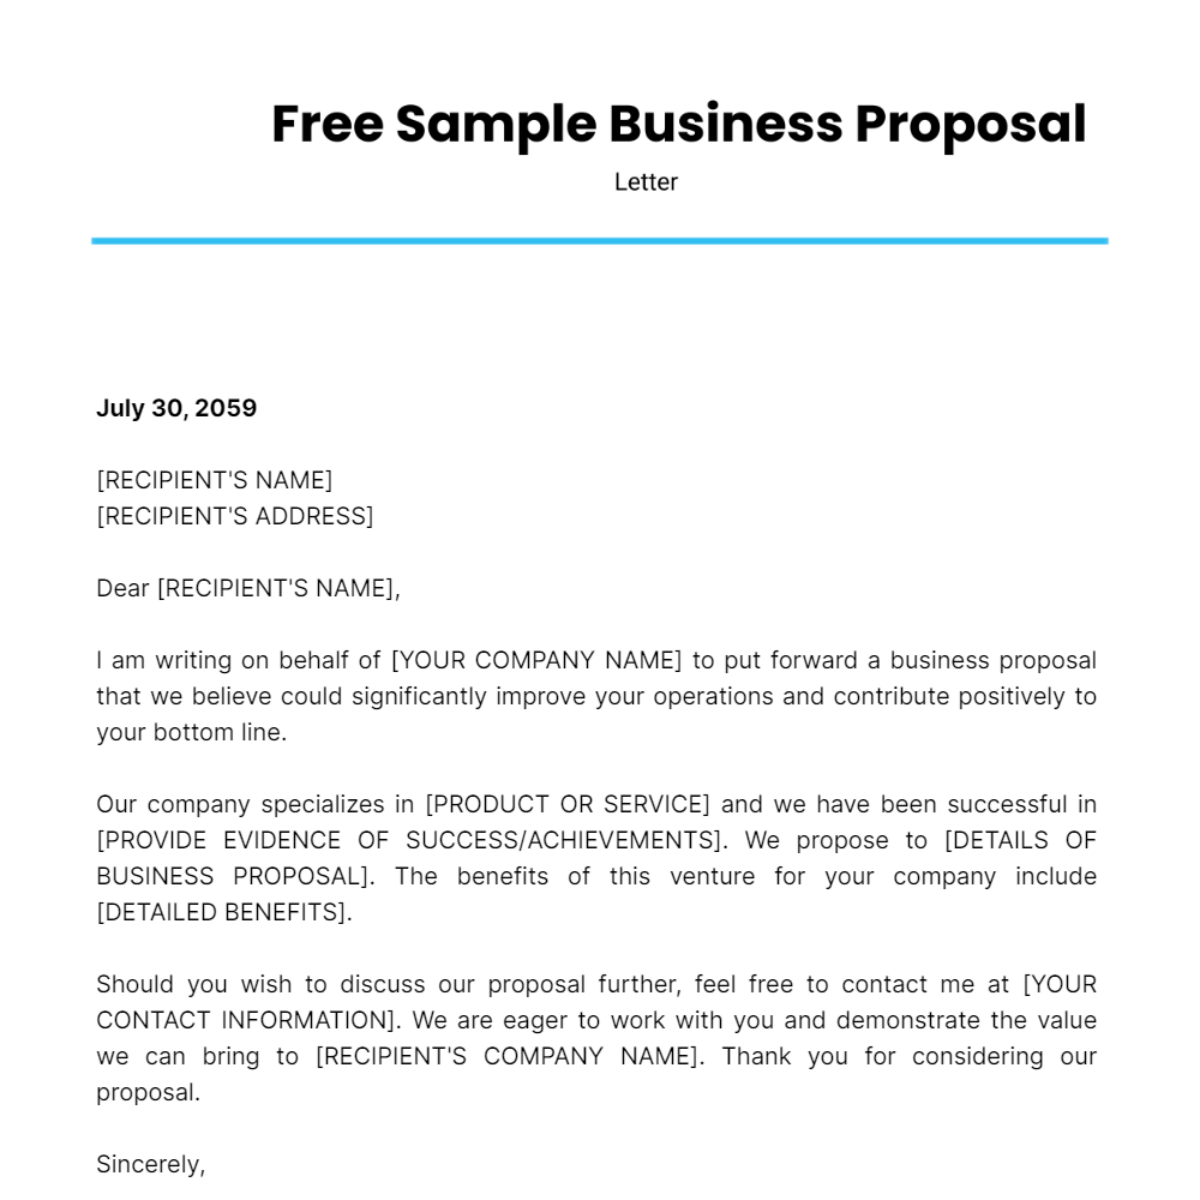 Sample Business Proposal Letter Template